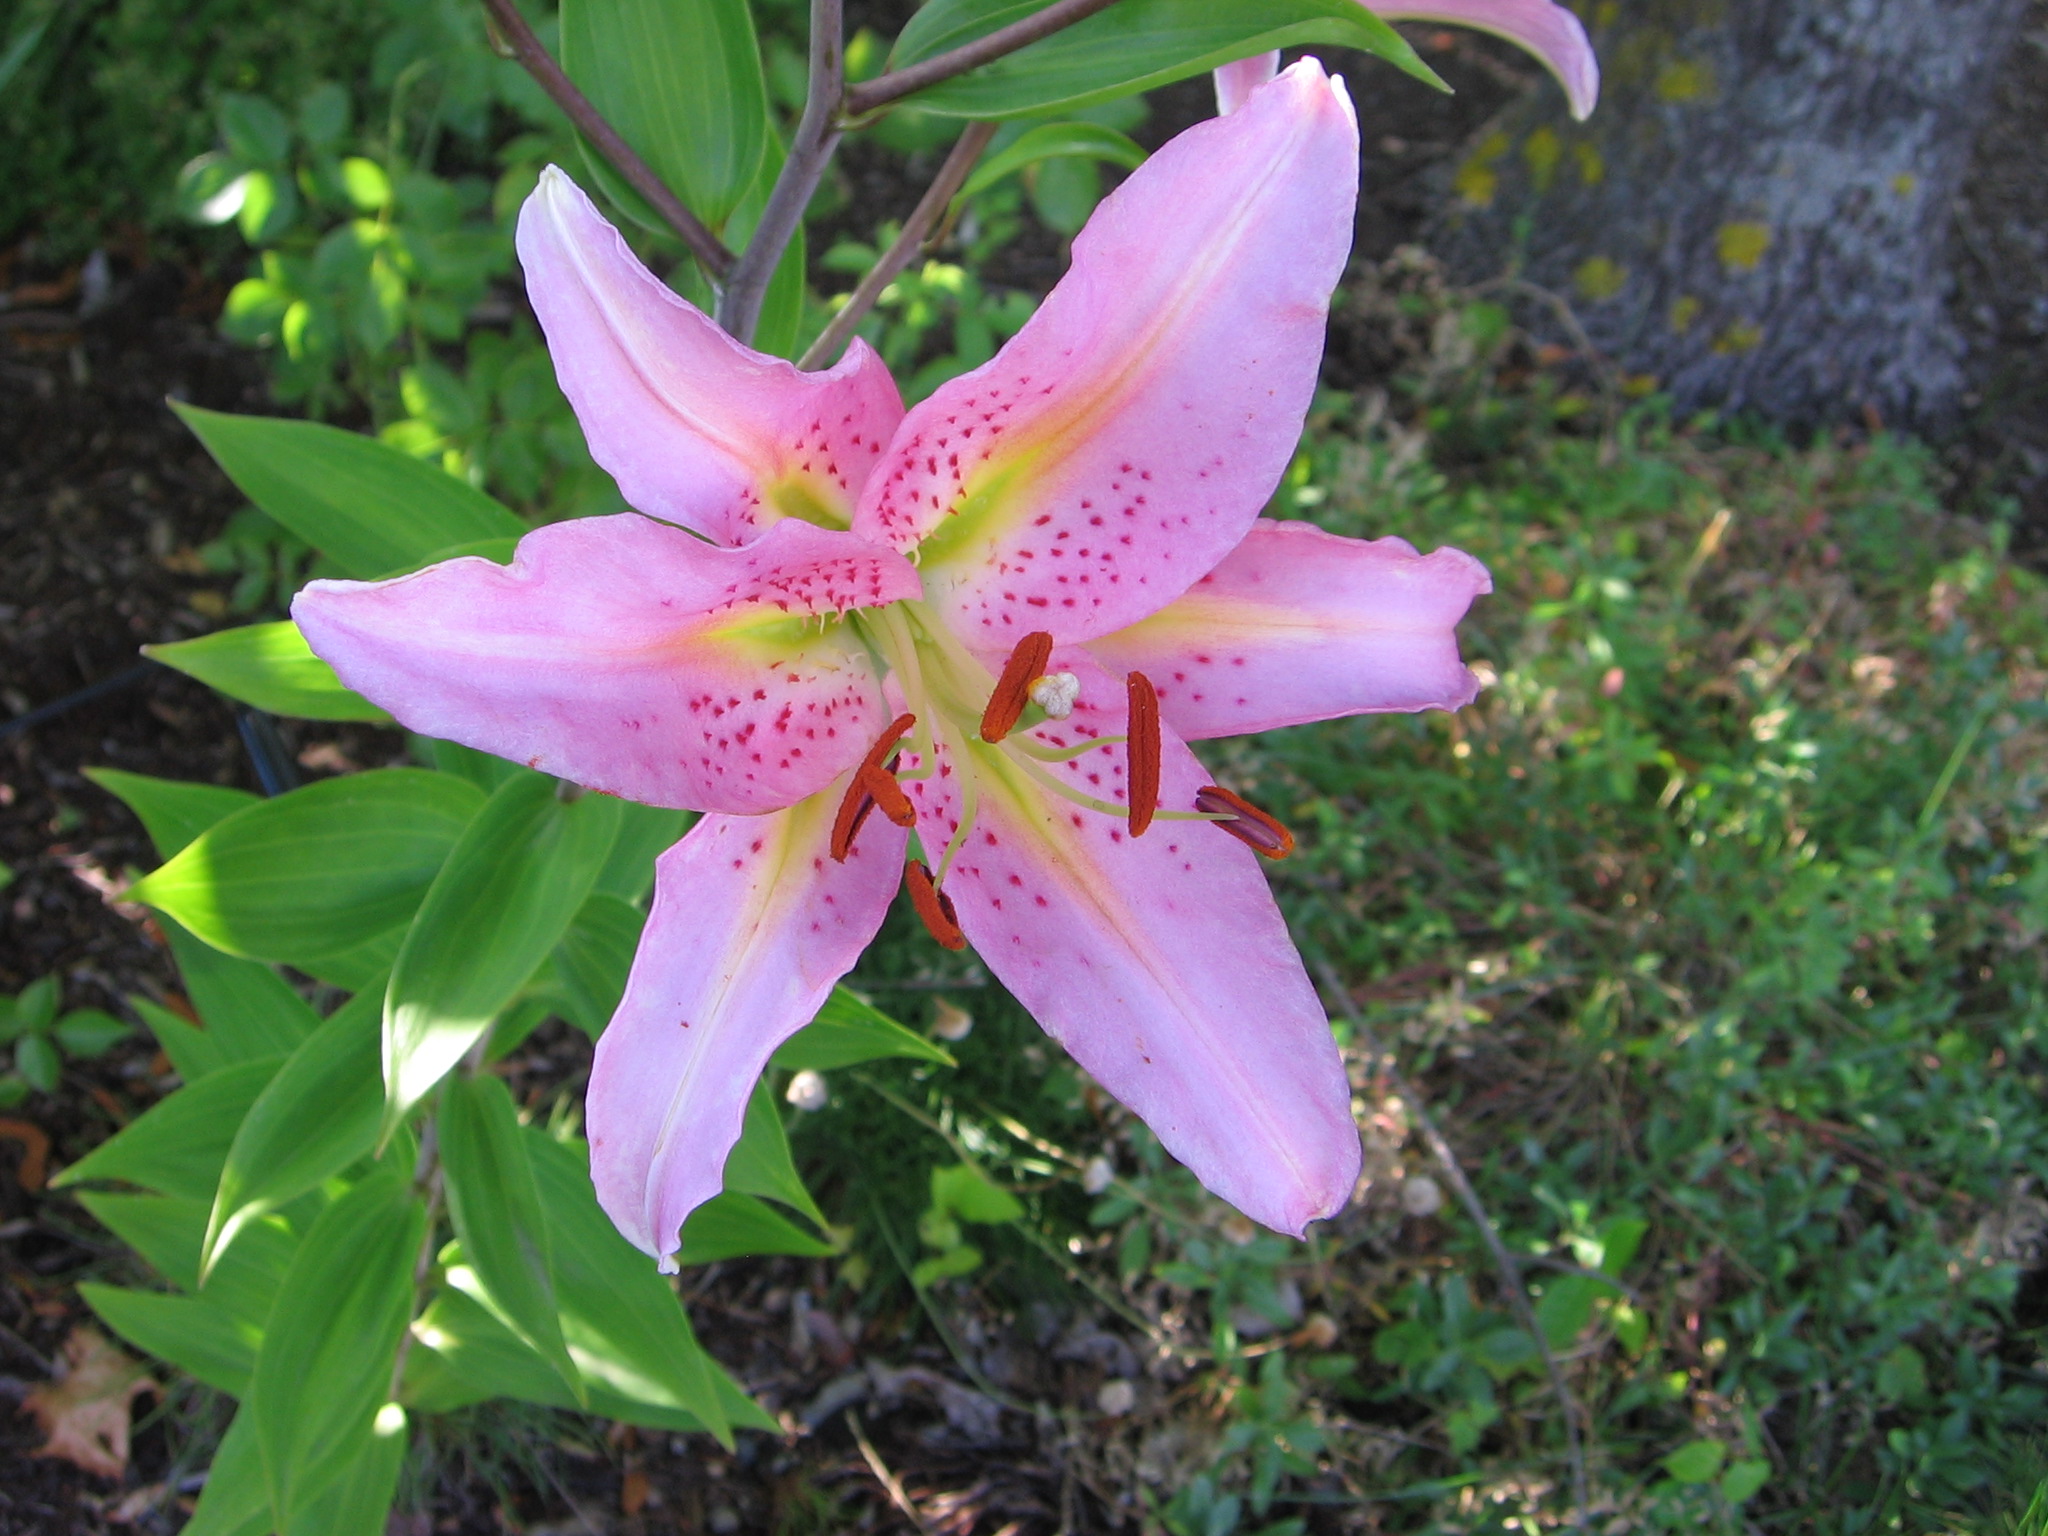 File:Pink star lily.jpg - Wikimedia Commons